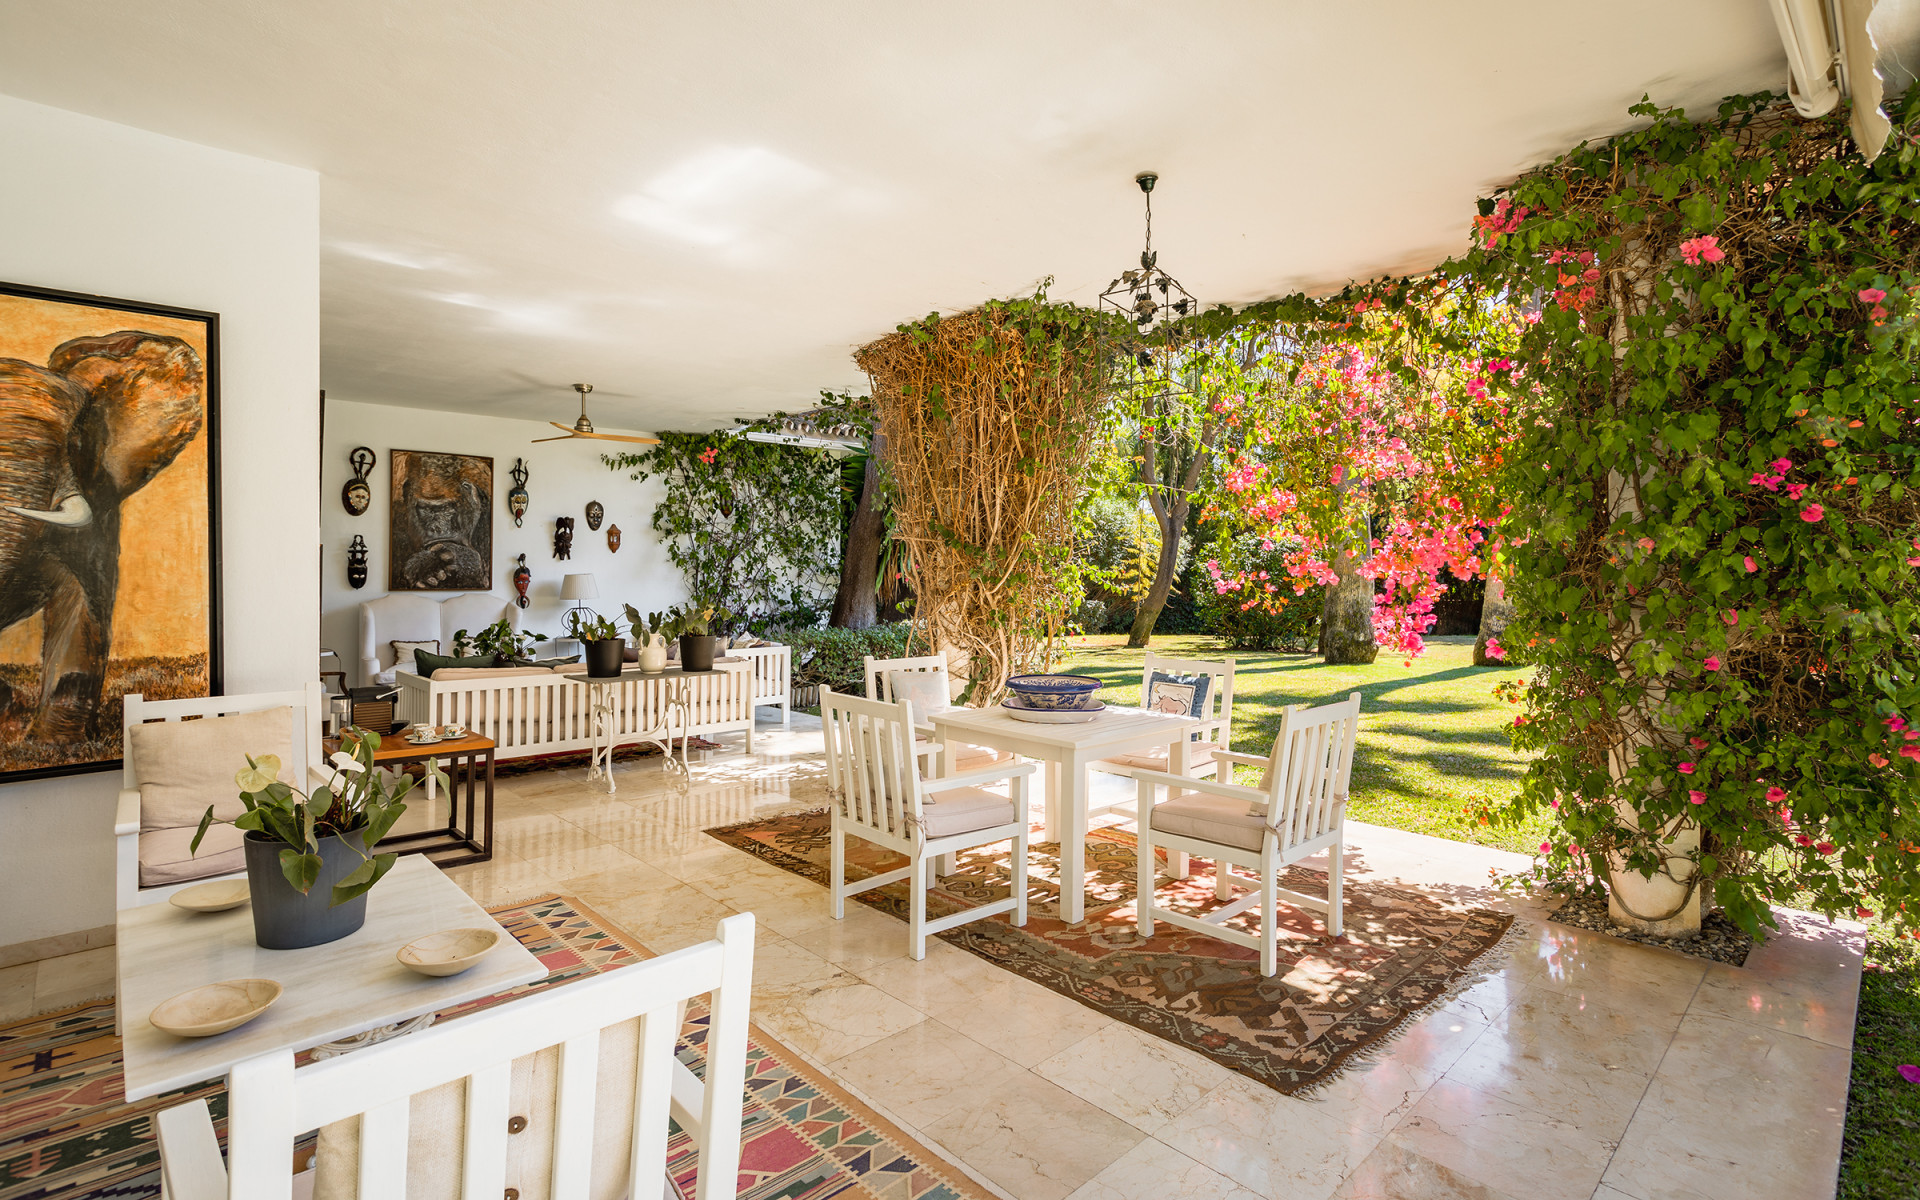 Elegant villa distributed entirely on one level set in the quiet area of Guadalmina Baja just a few meters from the beach